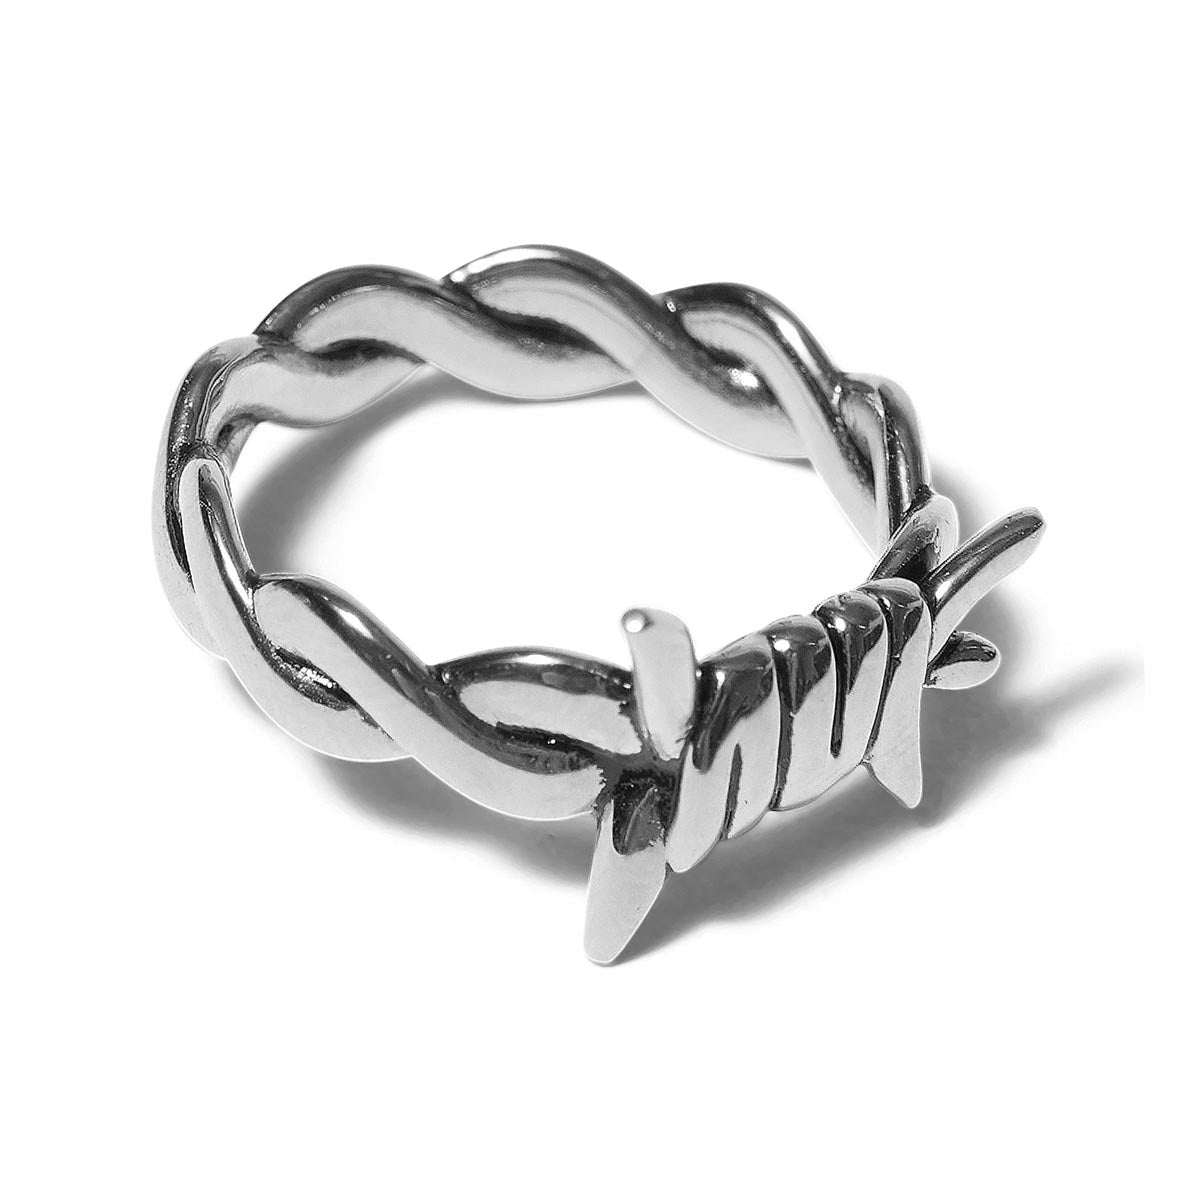 HUF Barbed Wire Ring - Silver image 1